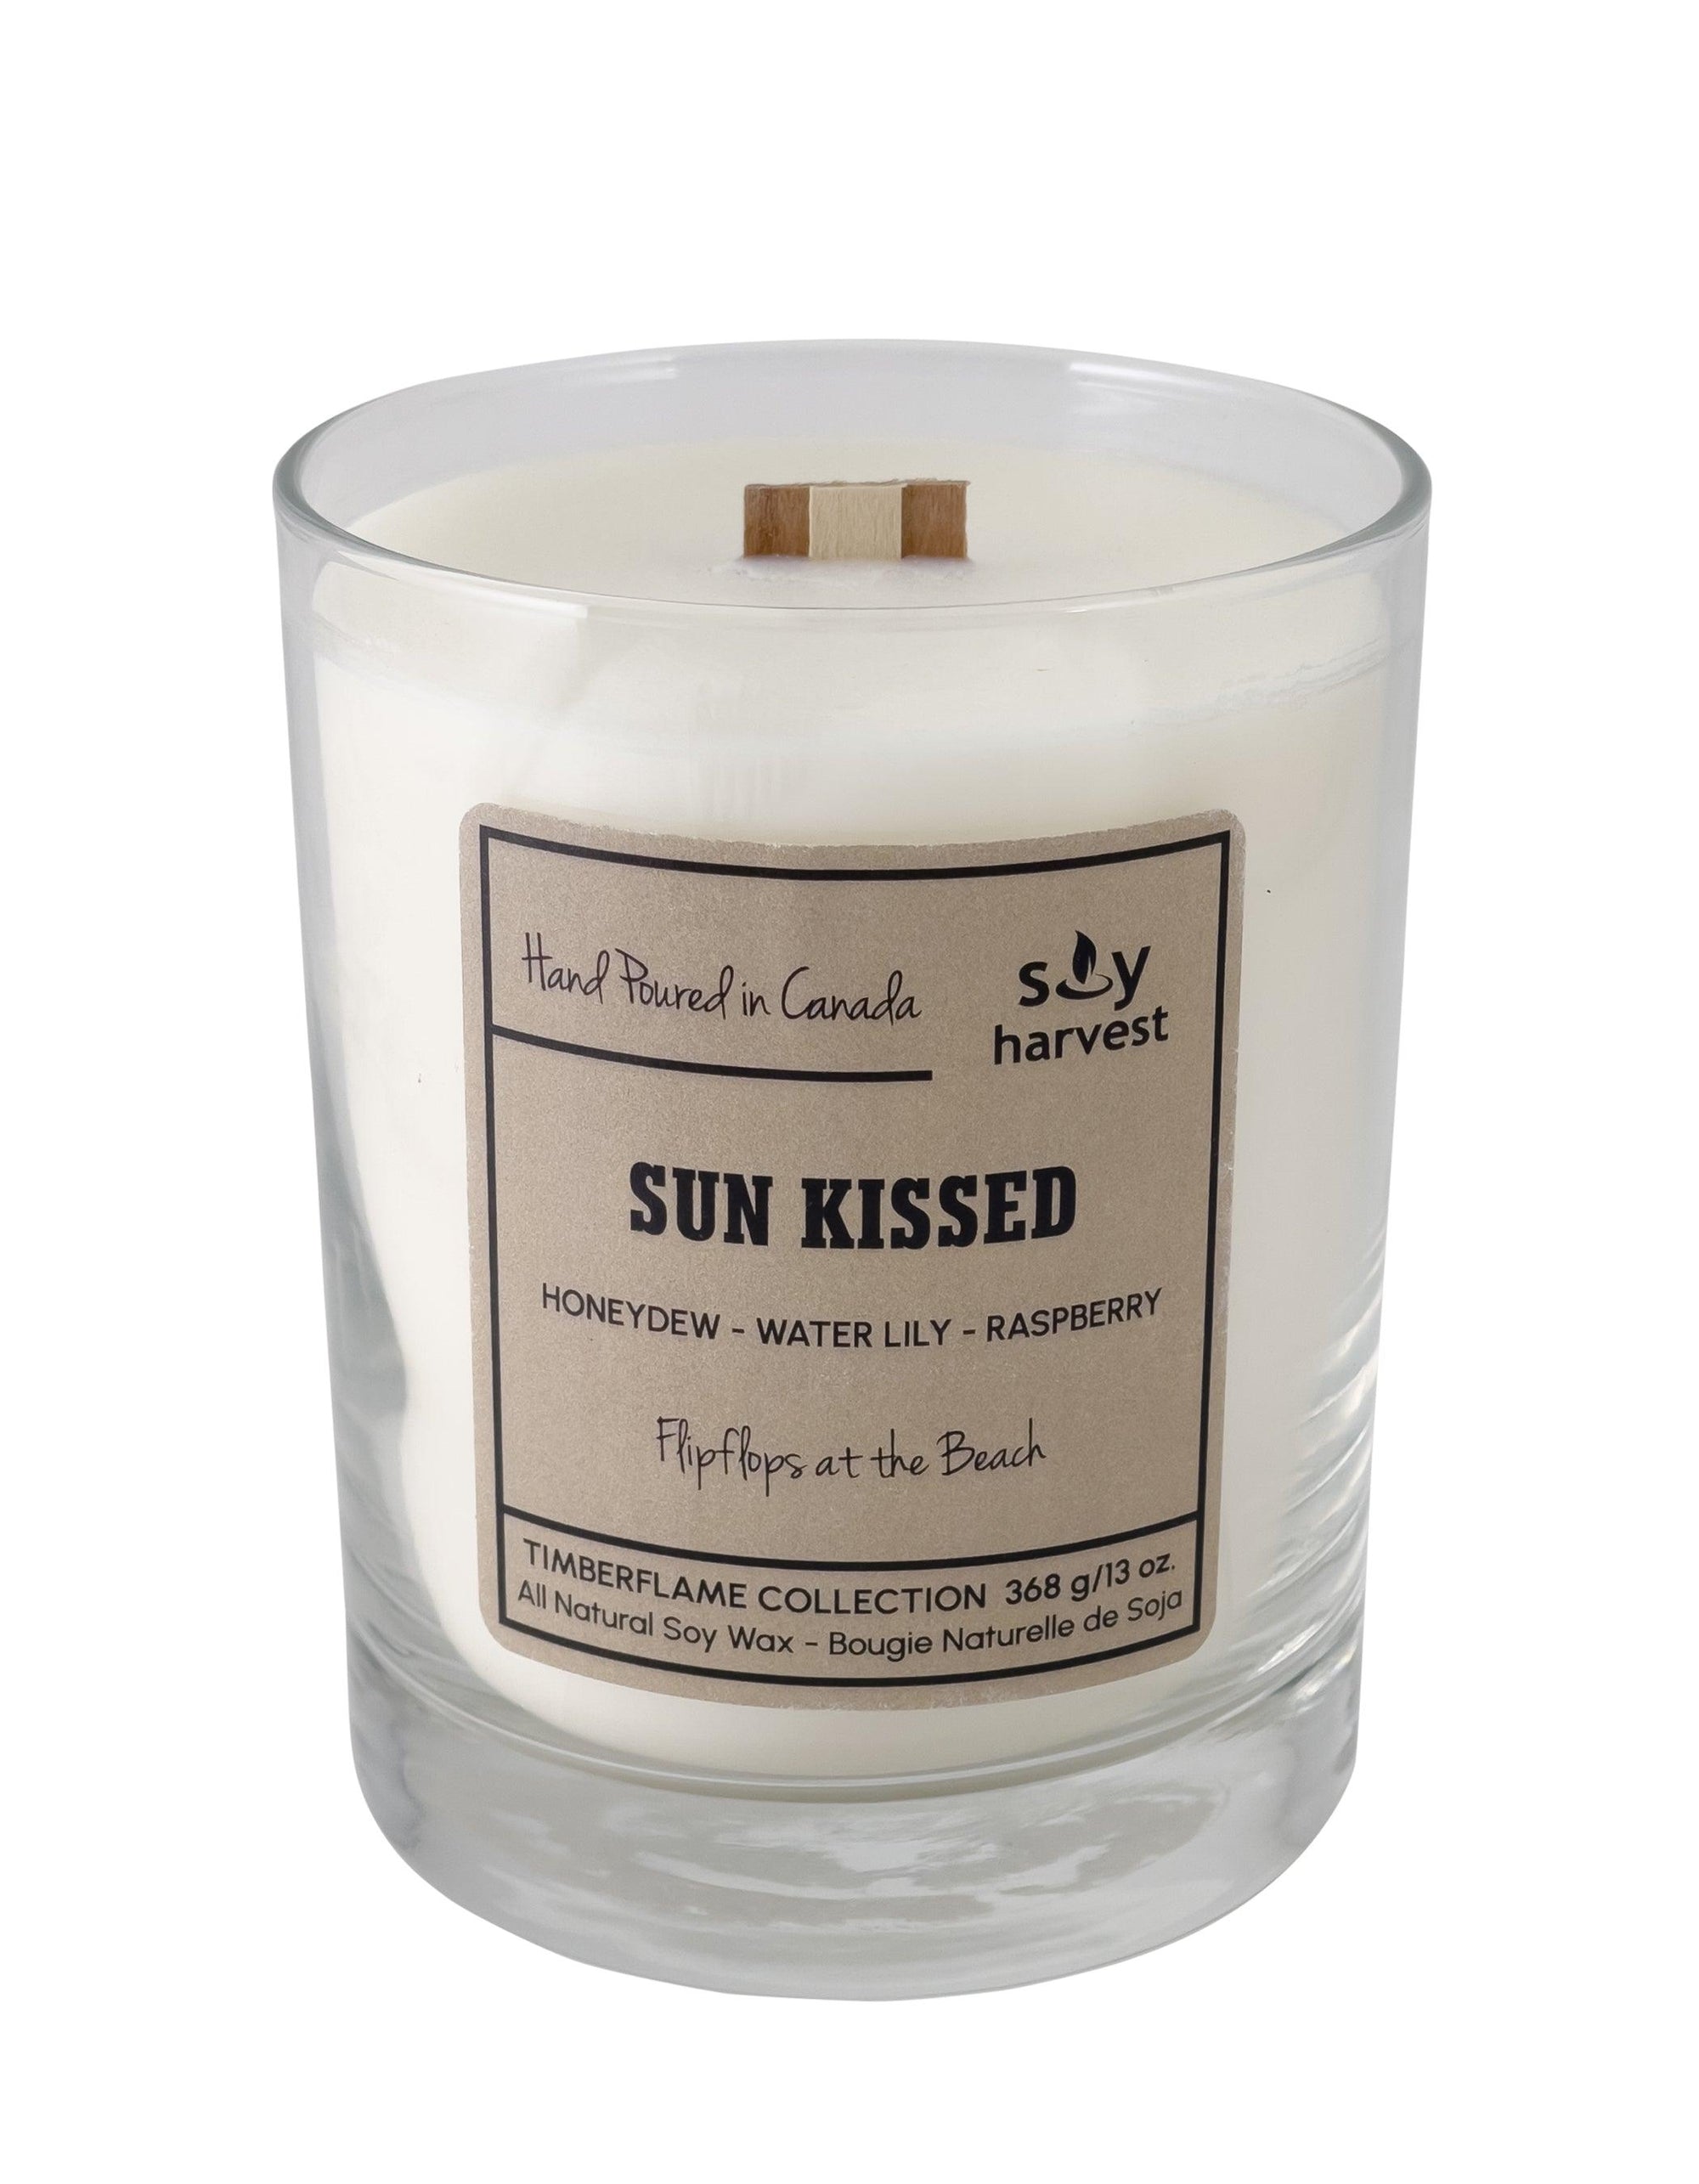 Sun Kissed Soy Harvest Candle